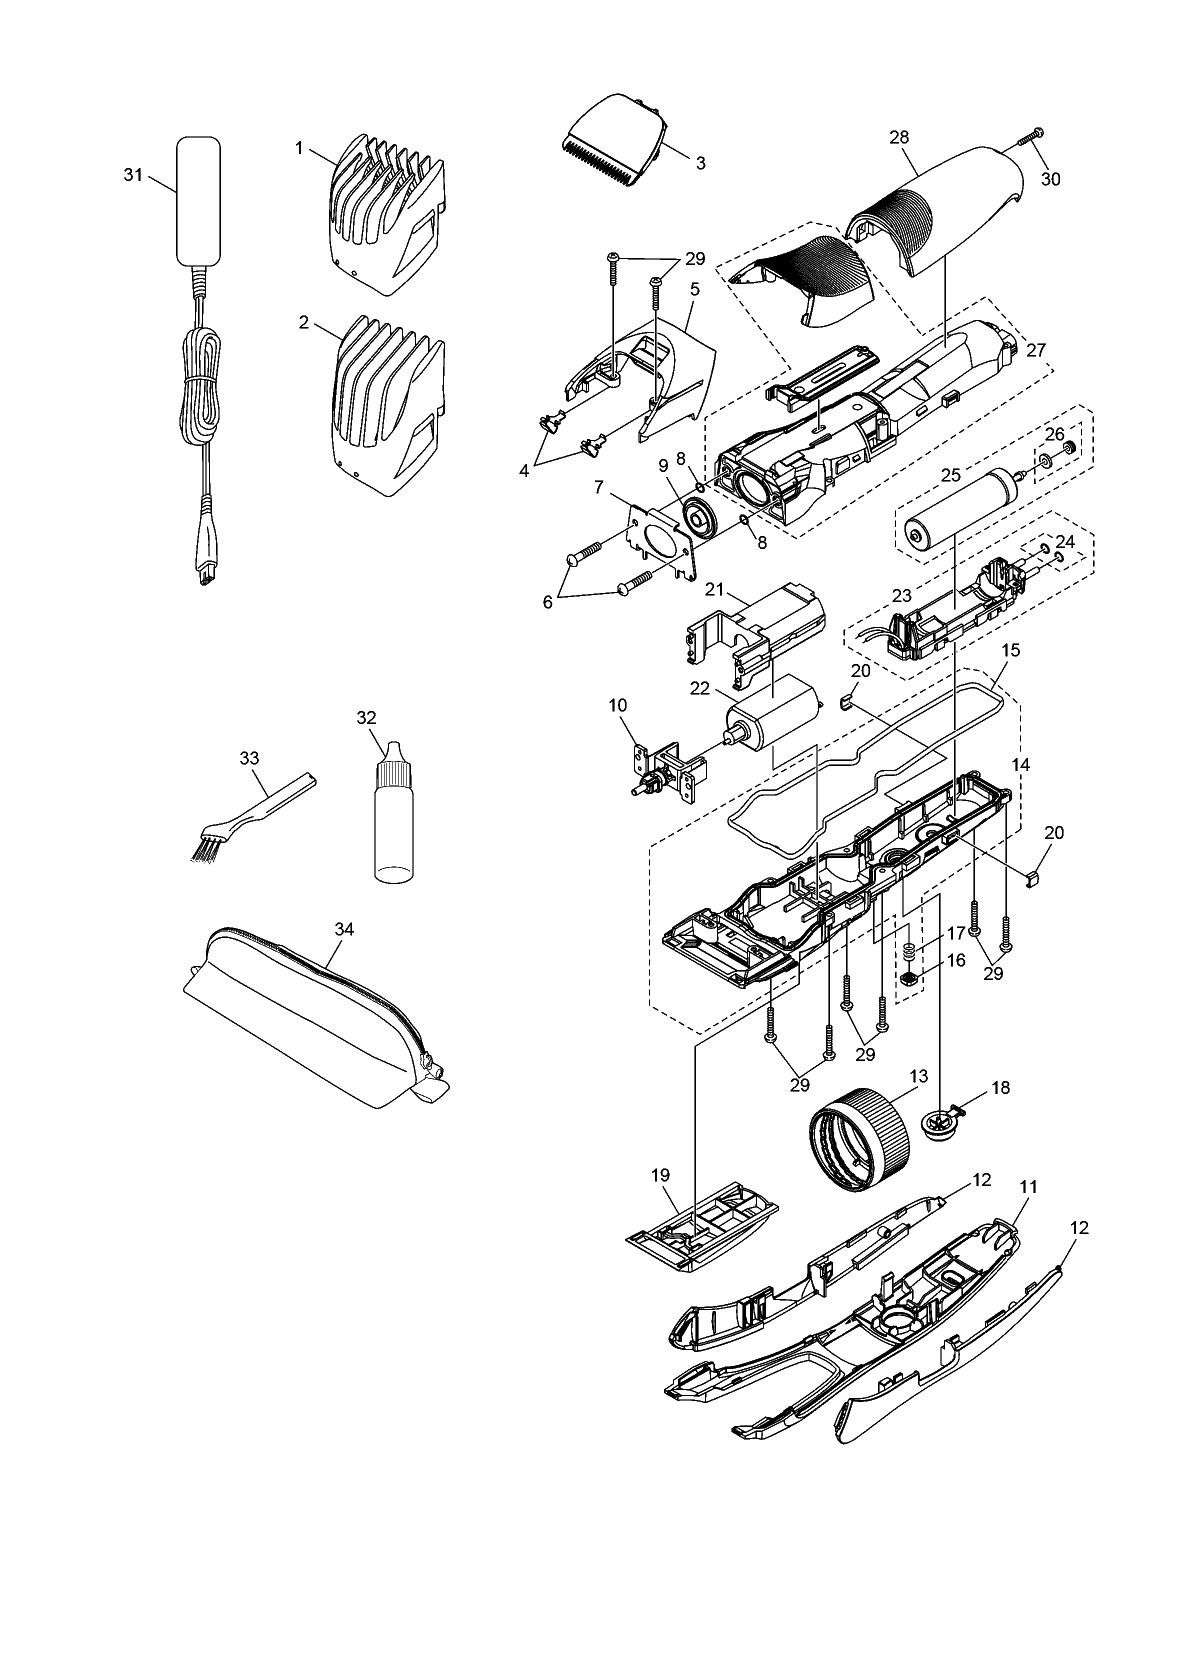 ER-GB60: Exploded View